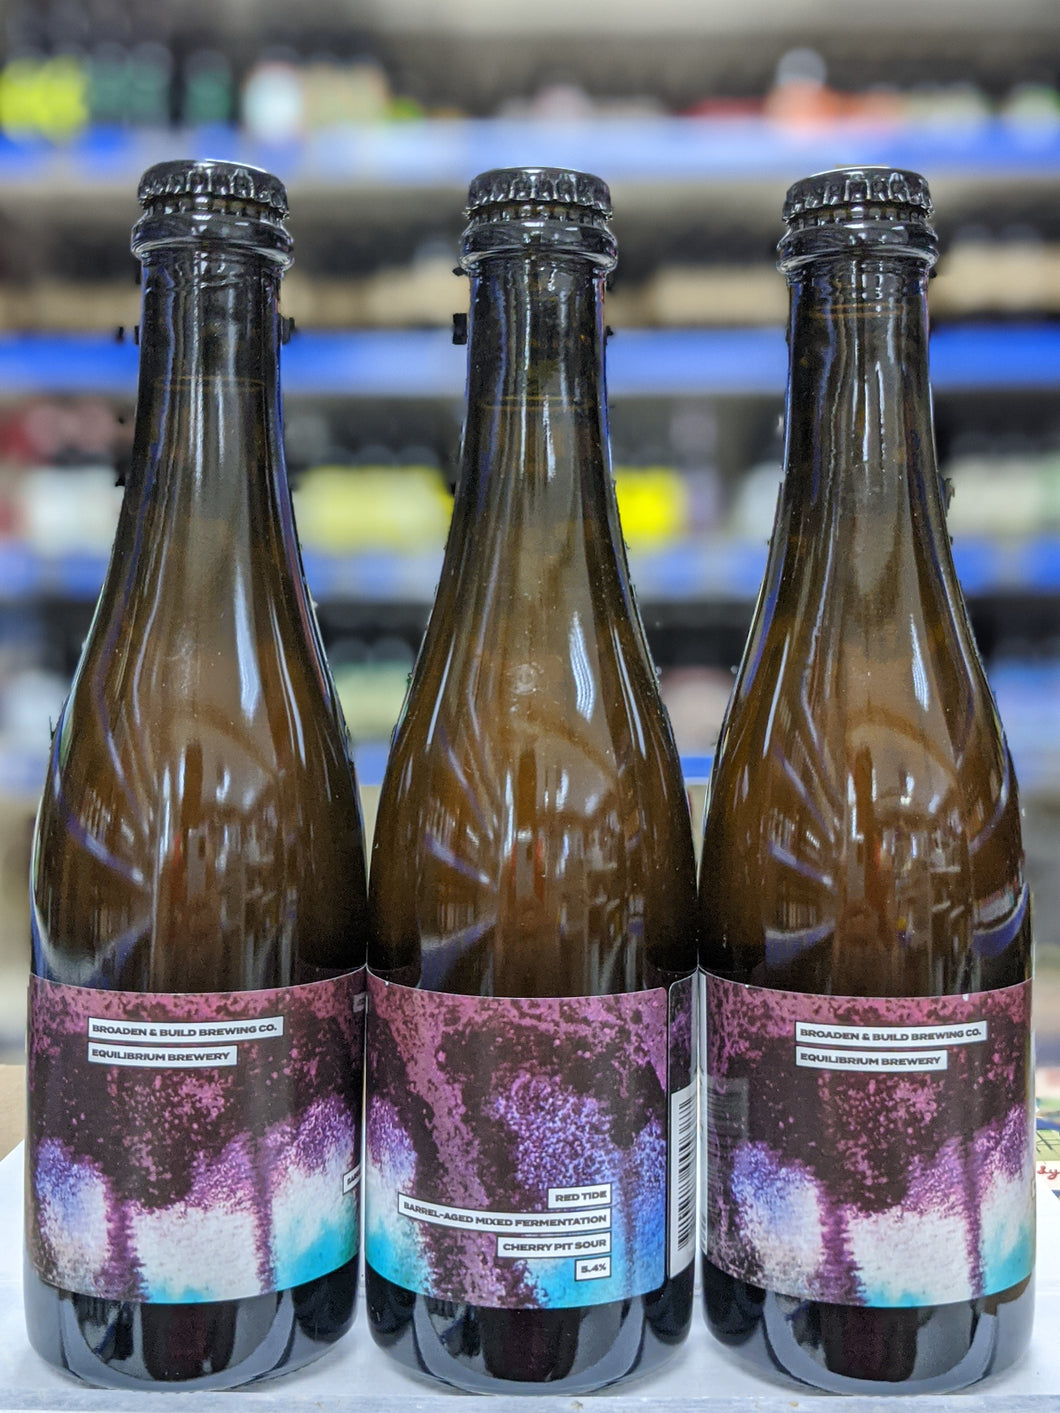 Red Tide - Broaden & Build X Equilibrium Brewery - Barrel Aged Mixed Ferm Cherry Pit Sour, 5.4%, 375ml Bottle